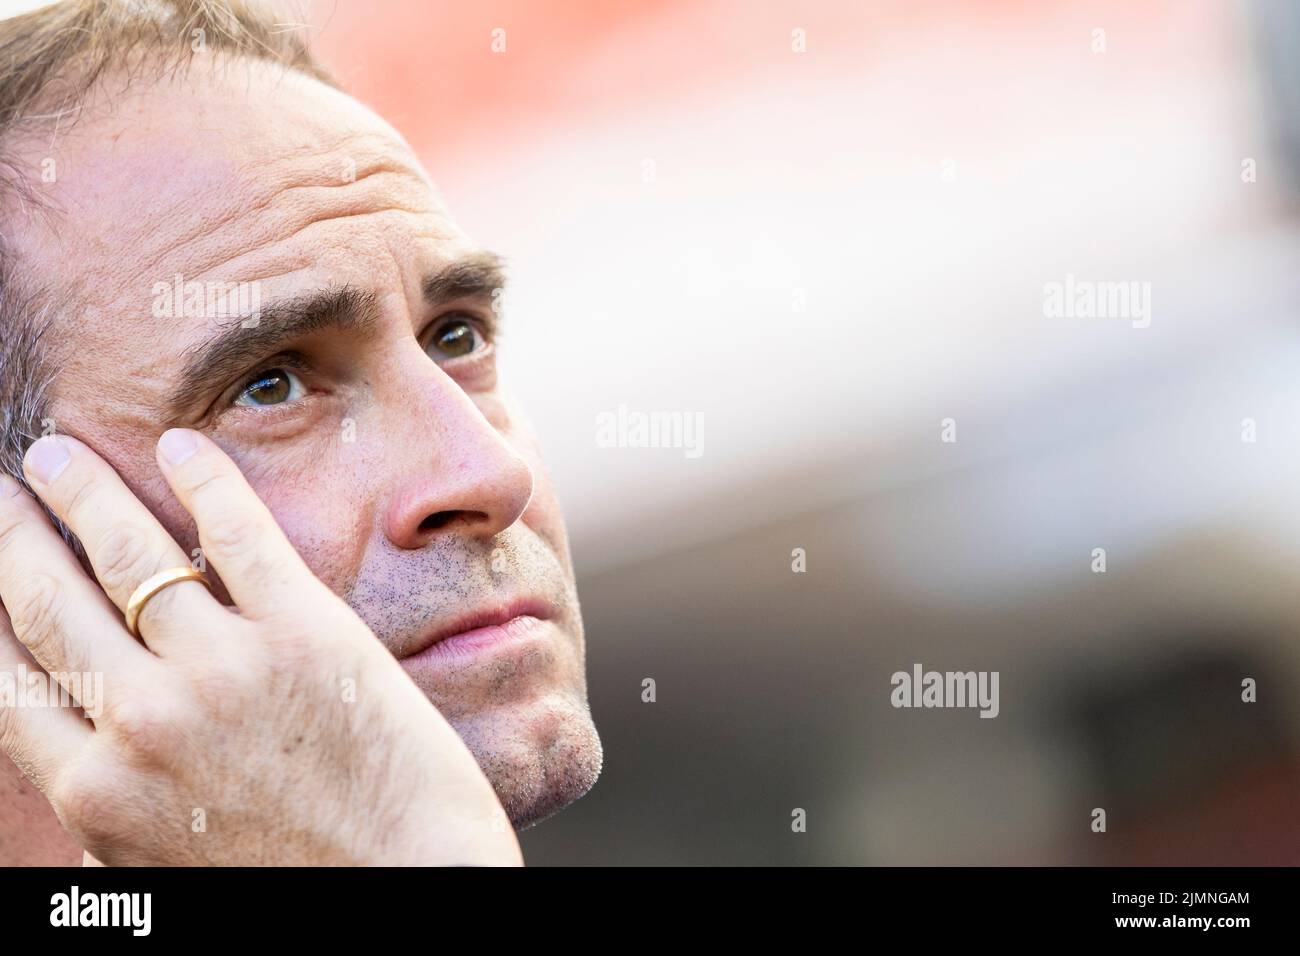 07 August 2022, Baden-Wuerttemberg, Stuttgart: Soccer: Bundesliga, VfB Stuttgart - RB Leipzig, Matchday 1, Mercedes-Benz Arena. Leipzig's managing director Oliver Mintzlaff stands in the stadium before the match. Photo: Tom Weller/dpa - IMPORTANT NOTE: In accordance with the requirements of the DFL Deutsche Fußball Liga and the DFB Deutscher Fußball-Bund, it is prohibited to use or have used photographs taken in the stadium and/or of the match in the form of sequence pictures and/or video-like photo series. Stock Photo